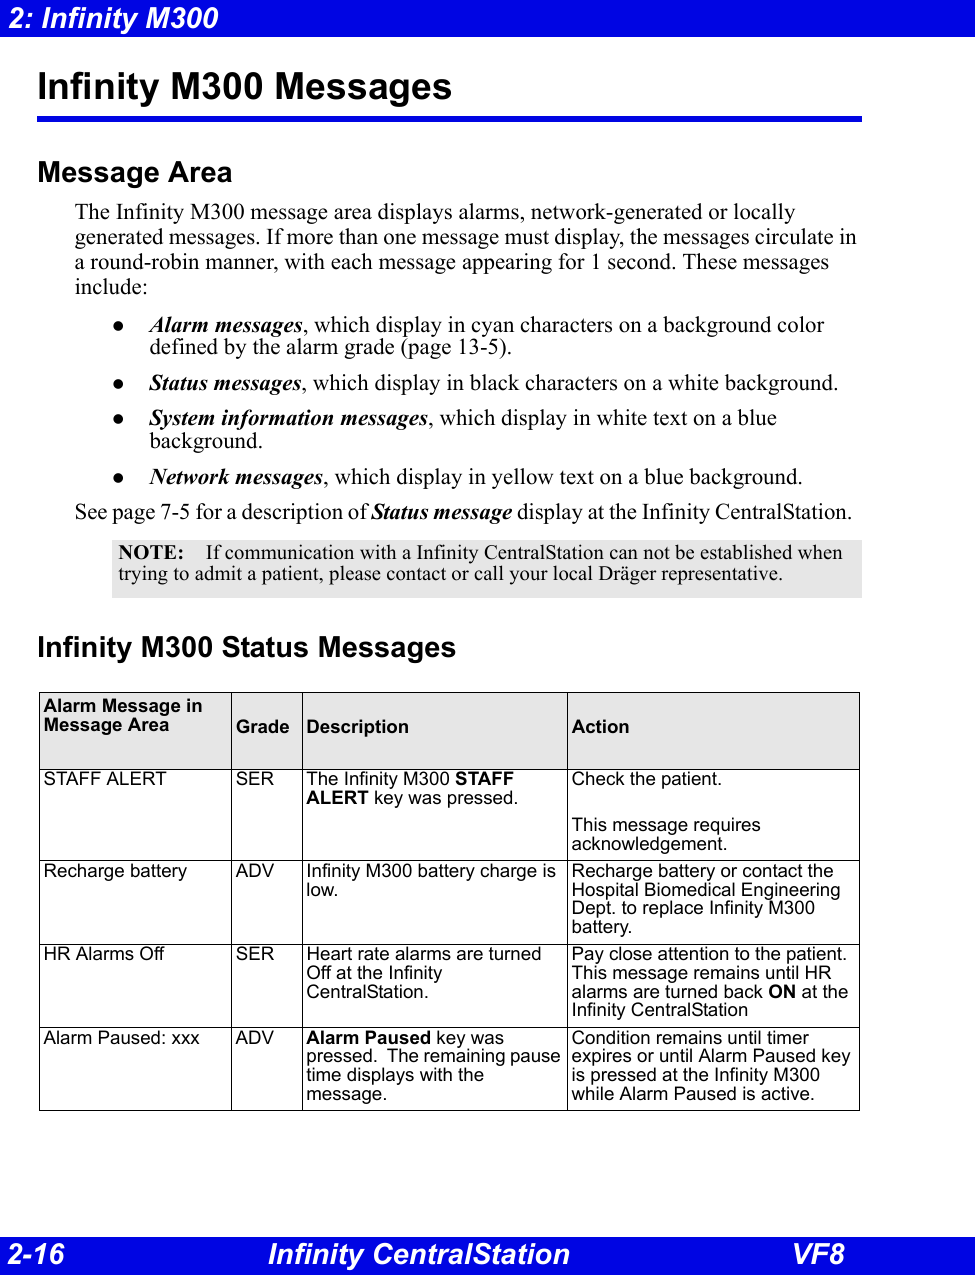 2-16 Infinity CentralStation VF82: Infinity M300Infinity M300 MessagesMessage AreaThe Infinity M300 message area displays alarms, network-generated or locally generated messages. If more than one message must display, the messages circulate in a round-robin manner, with each message appearing for 1 second. These messages include:zAlarm messages, which display in cyan characters on a background color defined by the alarm grade (page 13-5). zStatus messages, which display in black characters on a white background. zSystem information messages, which display in white text on a blue background. zNetwork messages, which display in yellow text on a blue background. See page 7-5 for a description of Status message display at the Infinity CentralStation.  Infinity M300 Status MessagesNOTE: If communication with a Infinity CentralStation can not be established when trying to admit a patient, please contact or call your local Dräger representative.Alarm Message in Message Area Grade Description  ActionSTAFF ALERT SER The Infinity M300 STAFF ALERT key was pressed.Check the patient.This message requires acknowledgement.Recharge battery ADV Infinity M300 battery charge is low.Recharge battery or contact the Hospital Biomedical Engineering Dept. to replace Infinity M300 battery.HR Alarms Off SER Heart rate alarms are turned Off at the Infinity CentralStation.Pay close attention to the patient.  This message remains until HR alarms are turned back ON at the Infinity CentralStationAlarm Paused: xxx ADV Alarm Paused key was pressed.  The remaining pause time displays with the message.Condition remains until timer expires or until Alarm Paused key is pressed at the Infinity M300 while Alarm Paused is active.